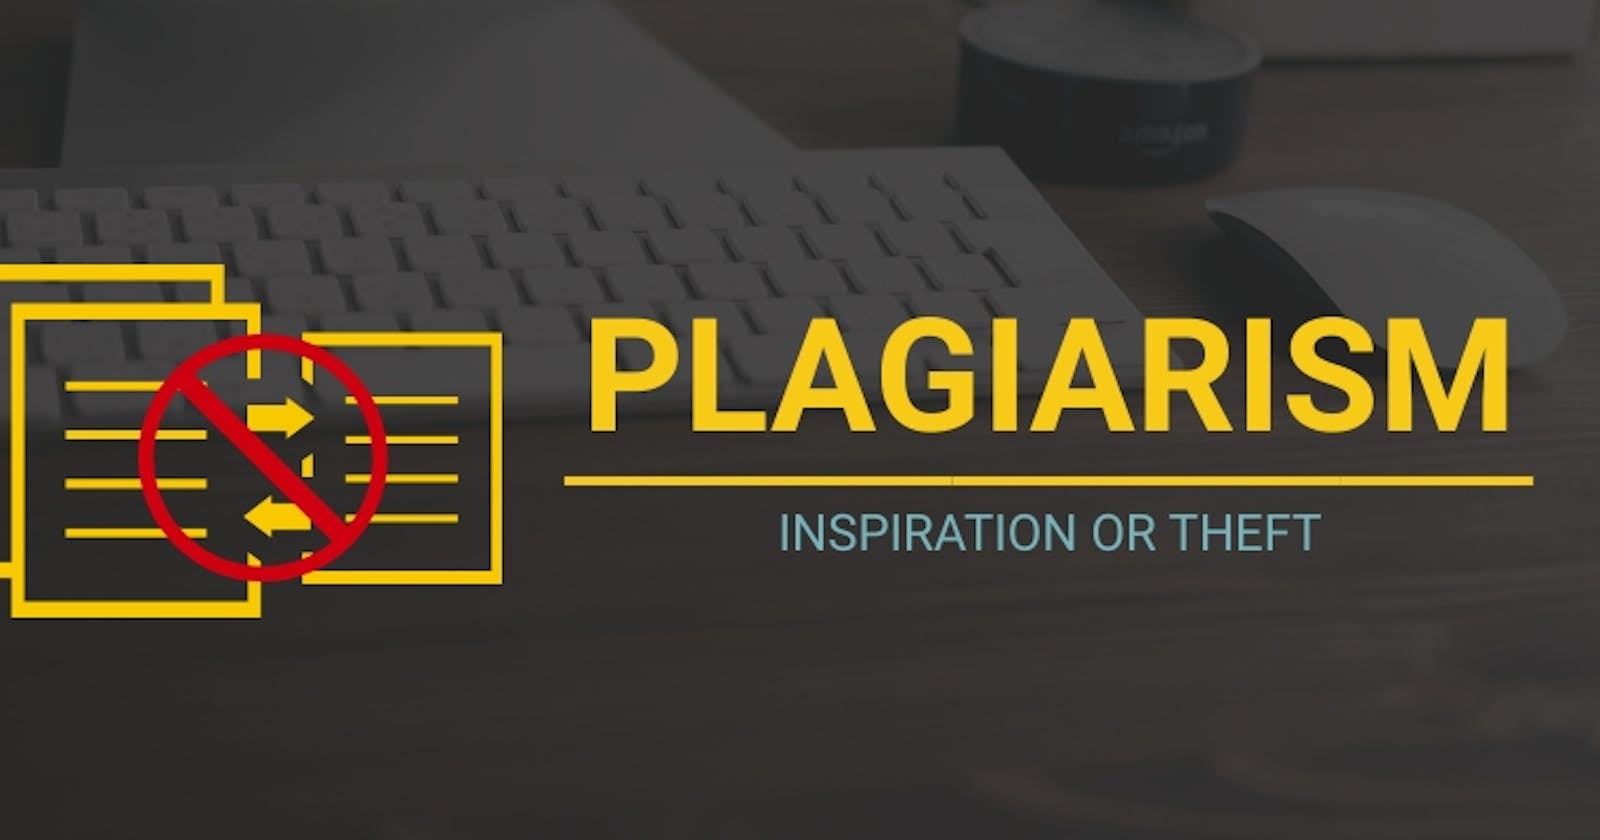 Plagiarism - Inspiration or Theft